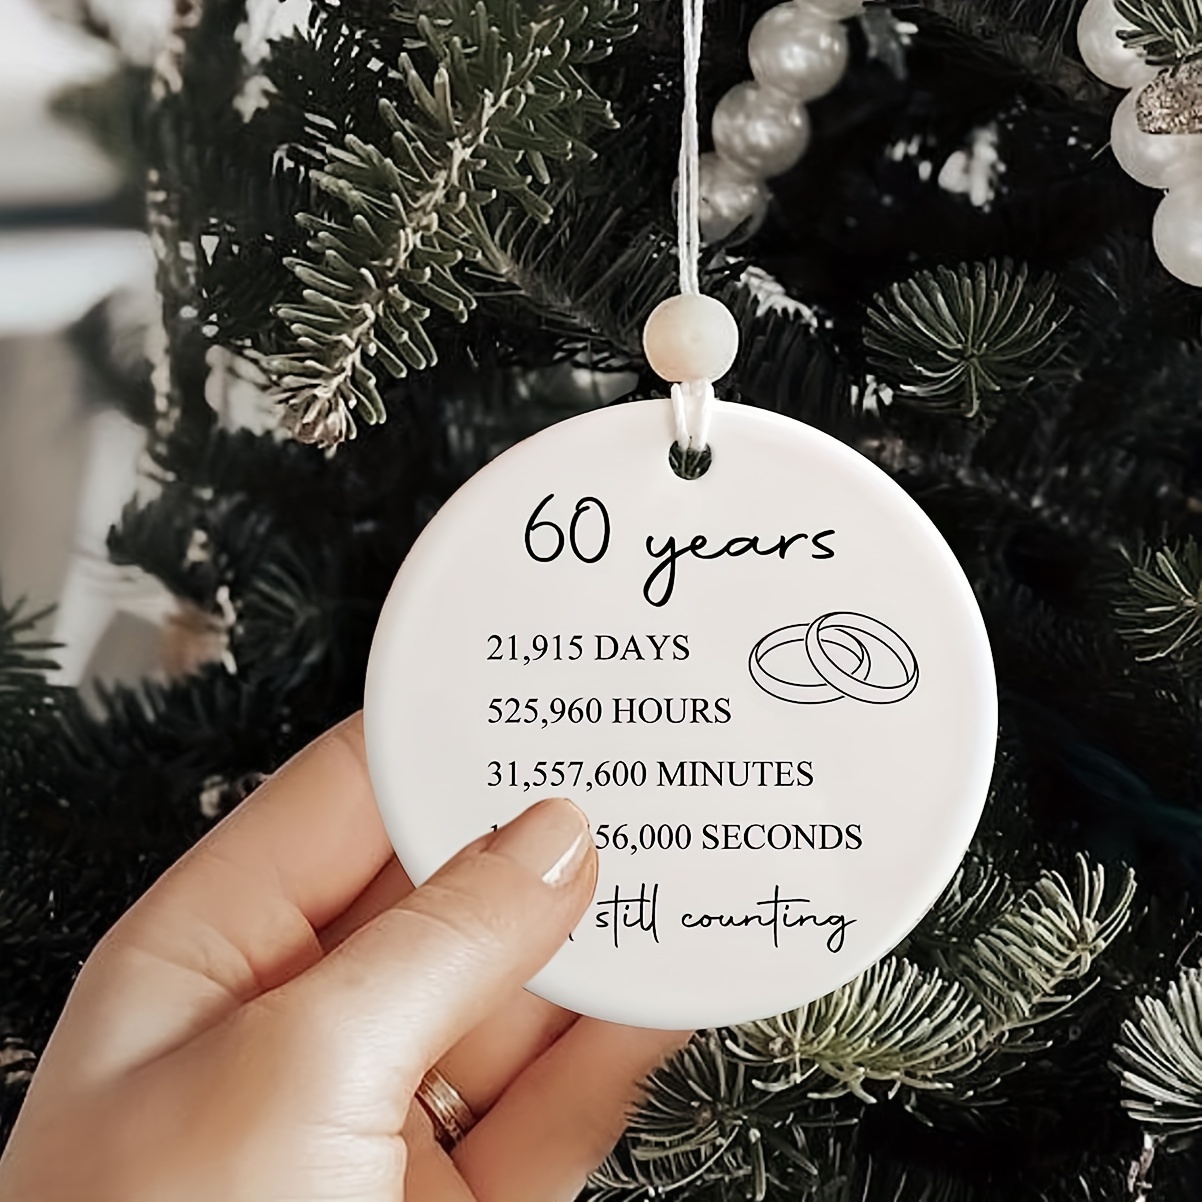  60th Wedding Anniversary Gifts for Parents, 60 Year Anniversary  Gifts for Couple, Diamond Anniversary Marriage Presents for Wife or Husband  : Handmade Products